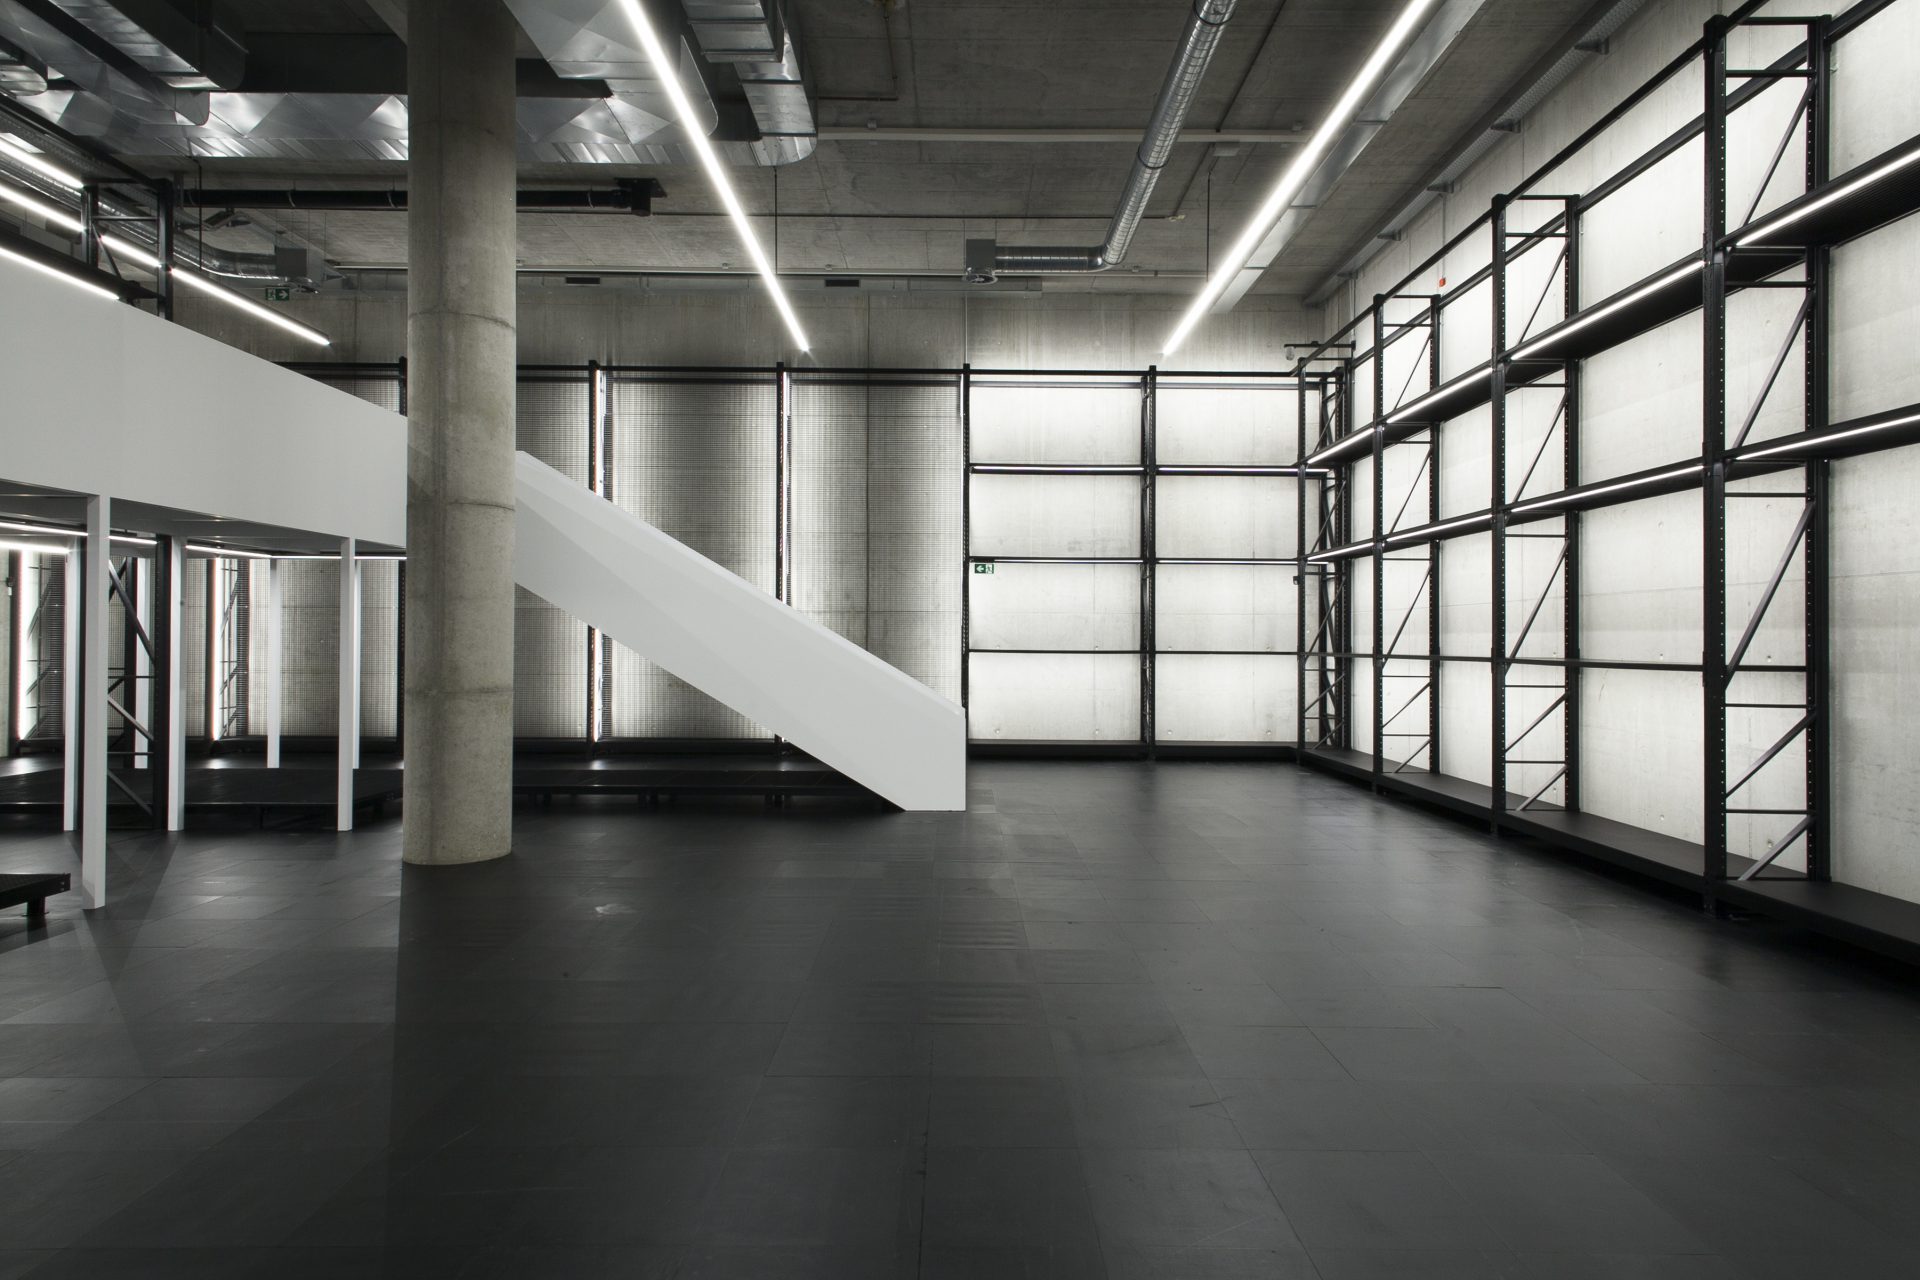 View of the empty showroom. The X-D-E-P-O-T is a large, high room with black shelves that reach up to the ceiling. The shelves are illuminated. The walls are made of grey concrete, the floor is black. On the left you can see a pillar and a white staircase coming from a walkway.